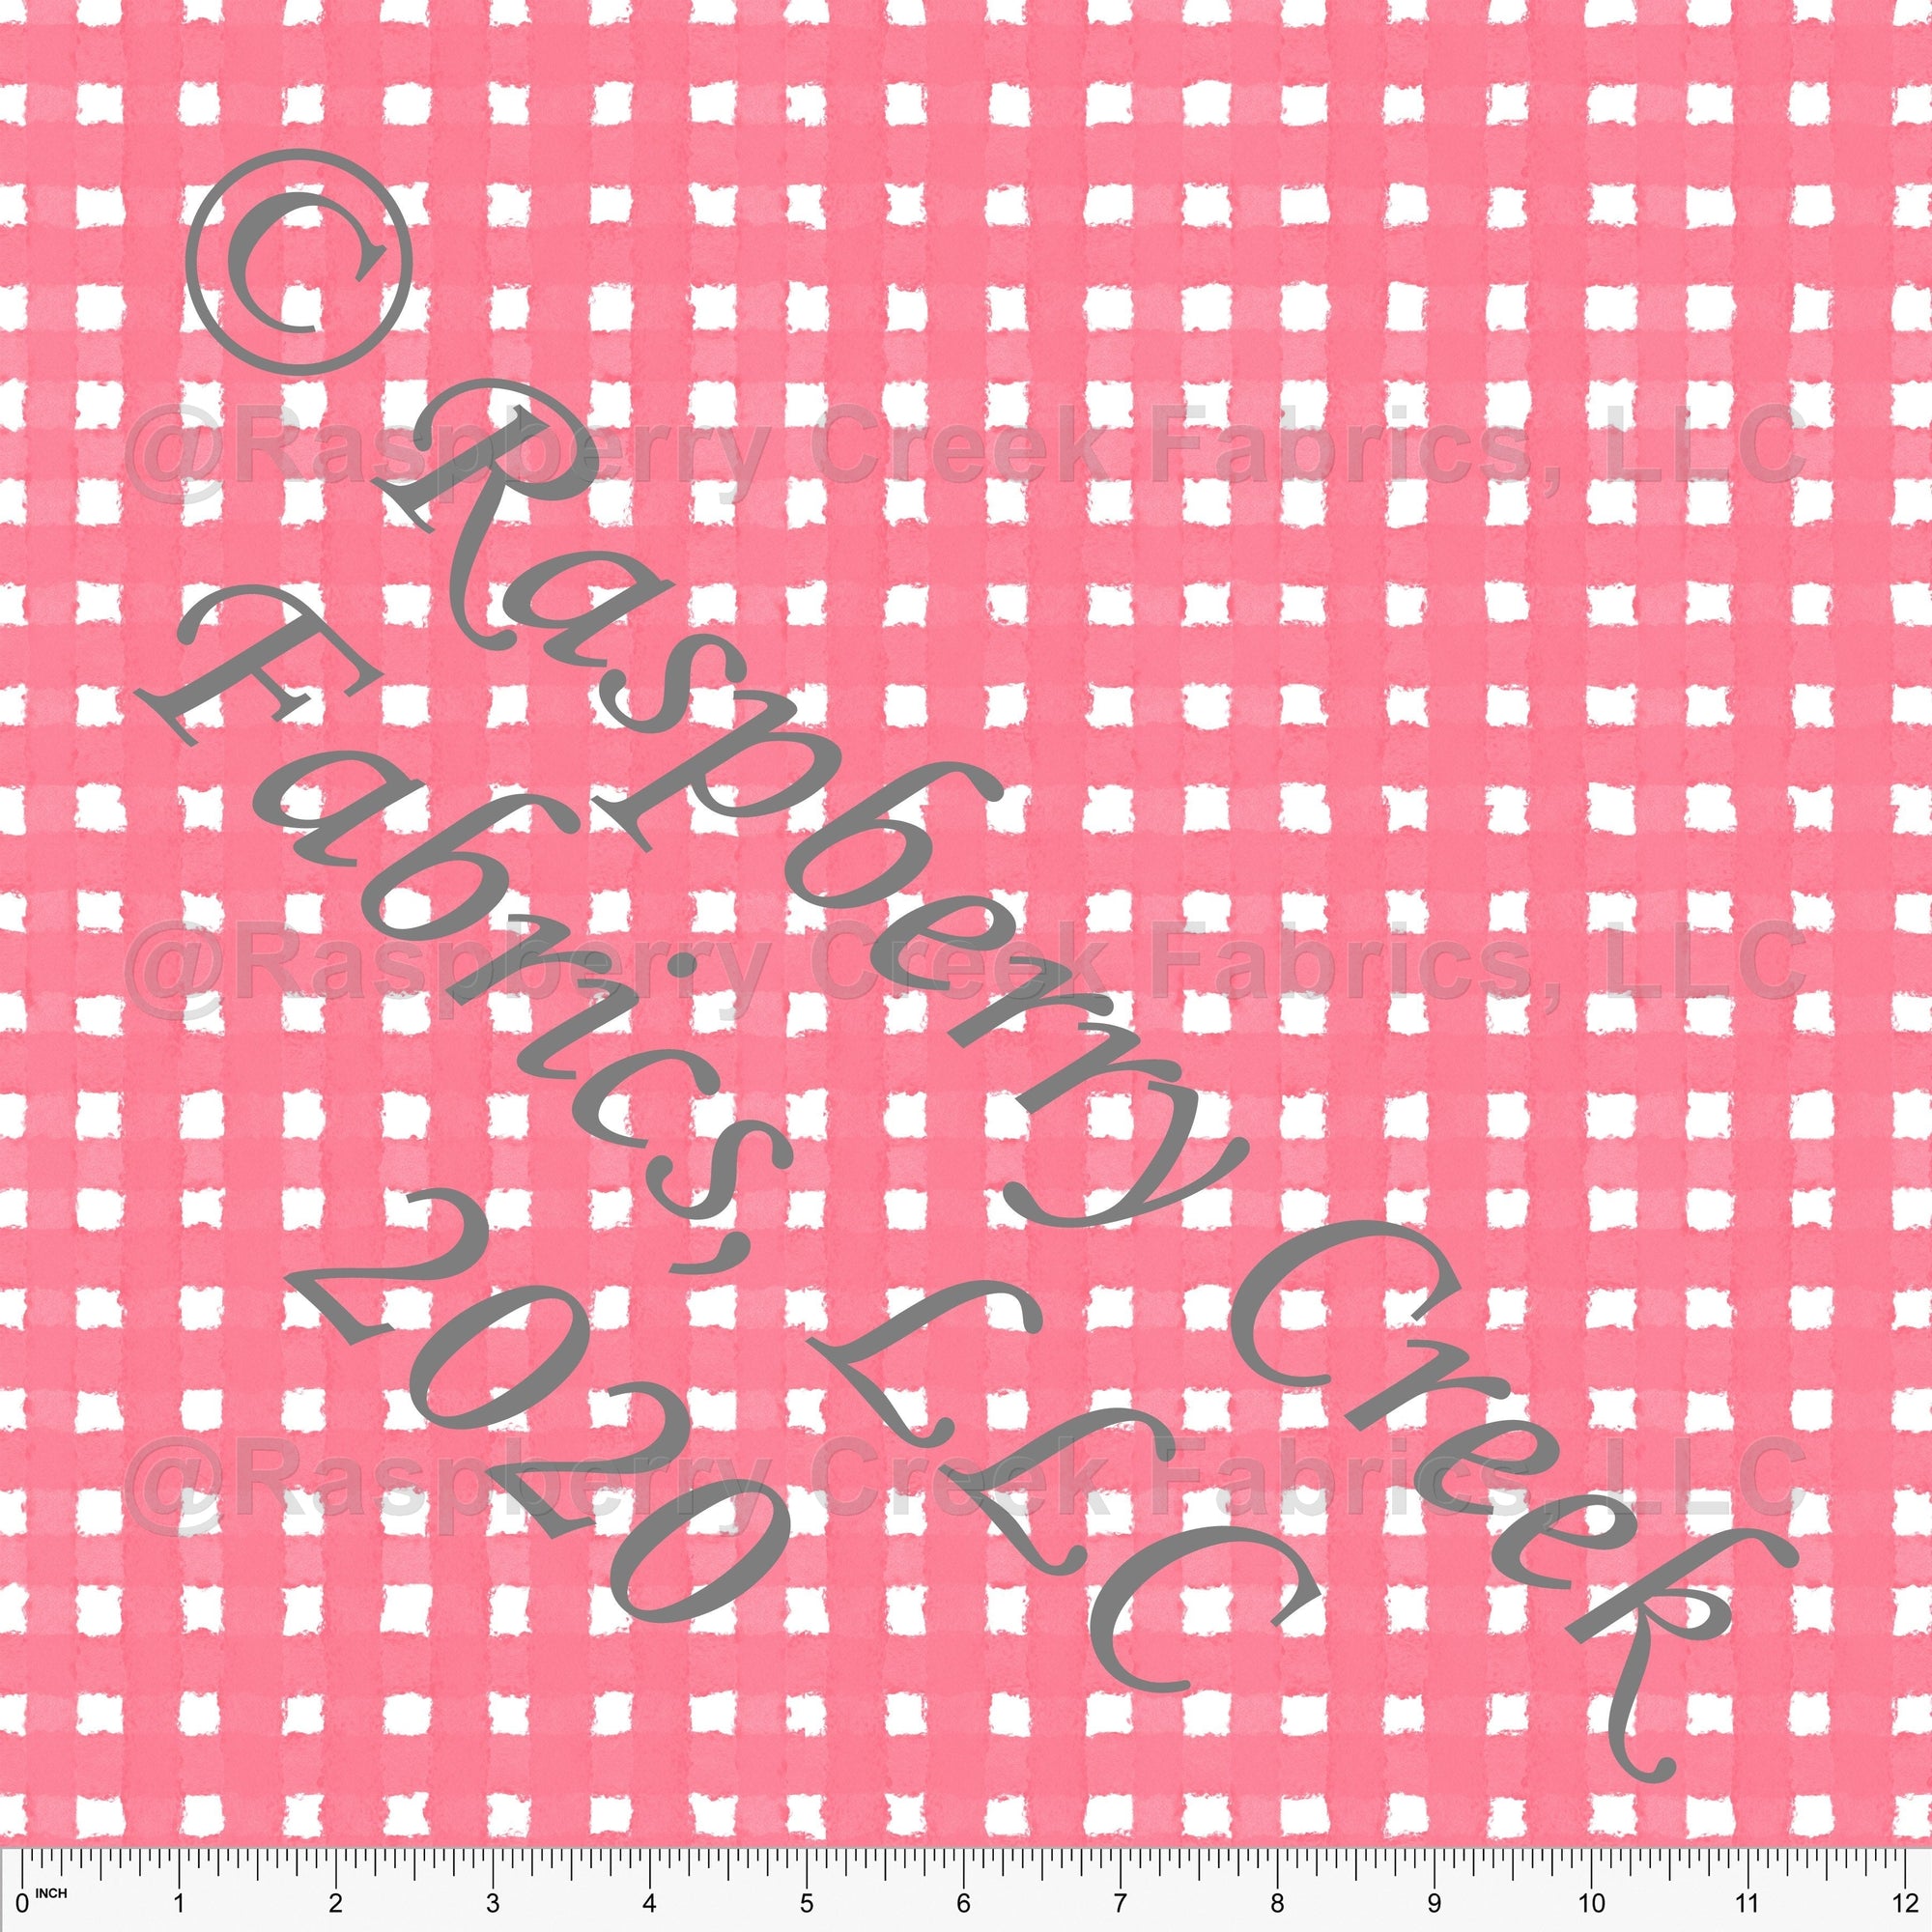 Salmon and White Painted Check Gingham, By Bri Powell for Club Fabrics Fabric, Raspberry Creek Fabrics, watermarked